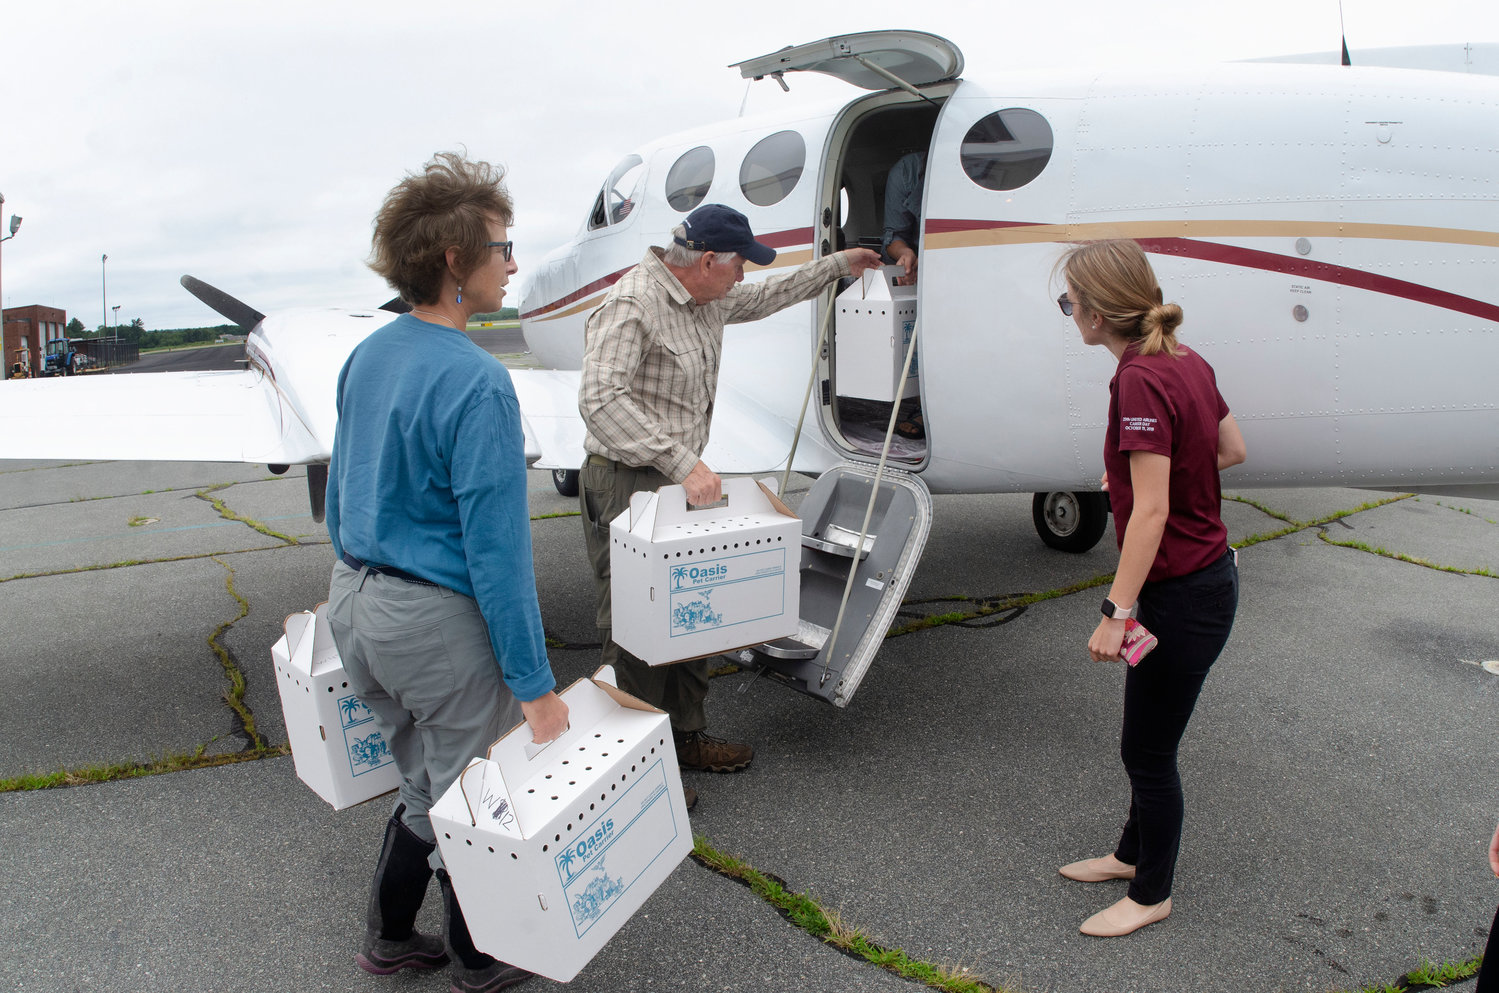 Gina Purtell and harold Isaksen help to load the osprey boxes into the small plane at the New Bedford Regional Airport.